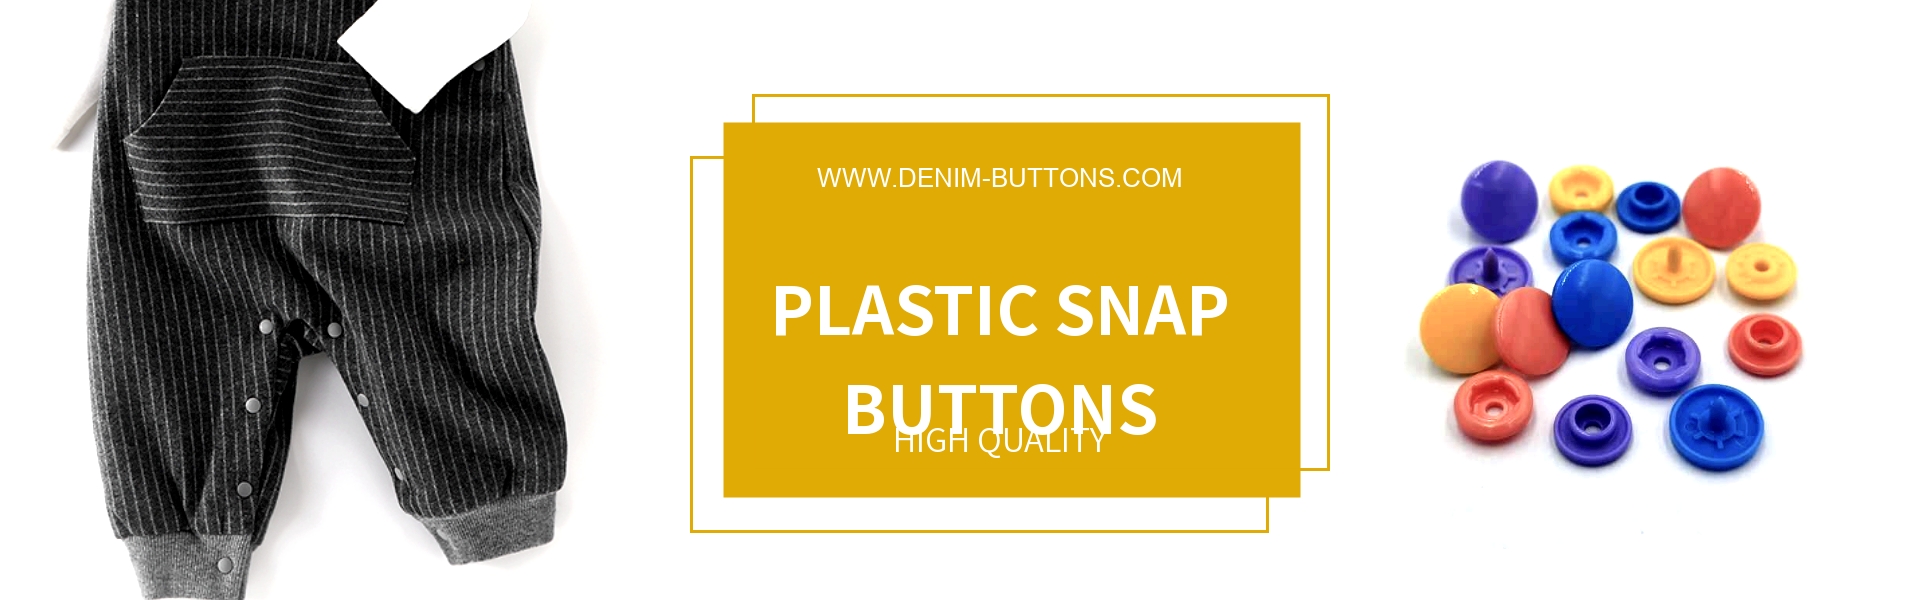 PLASTIC SNAP BUTTONS